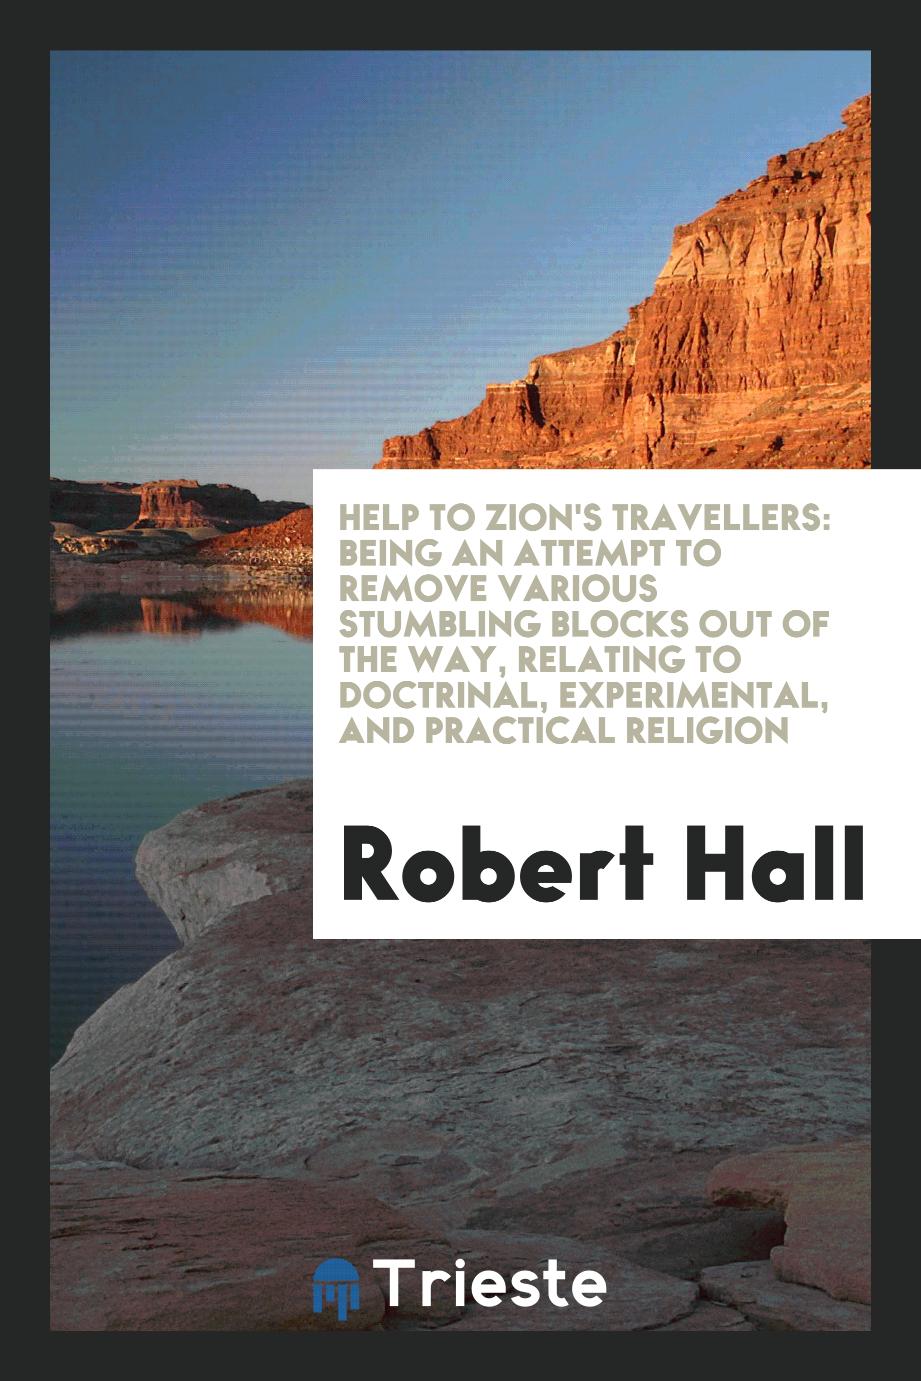 Help to Zion's travellers: being an attempt to remove various stumbling blocks out of the way, relating to doctrinal, experimental, and practical religion